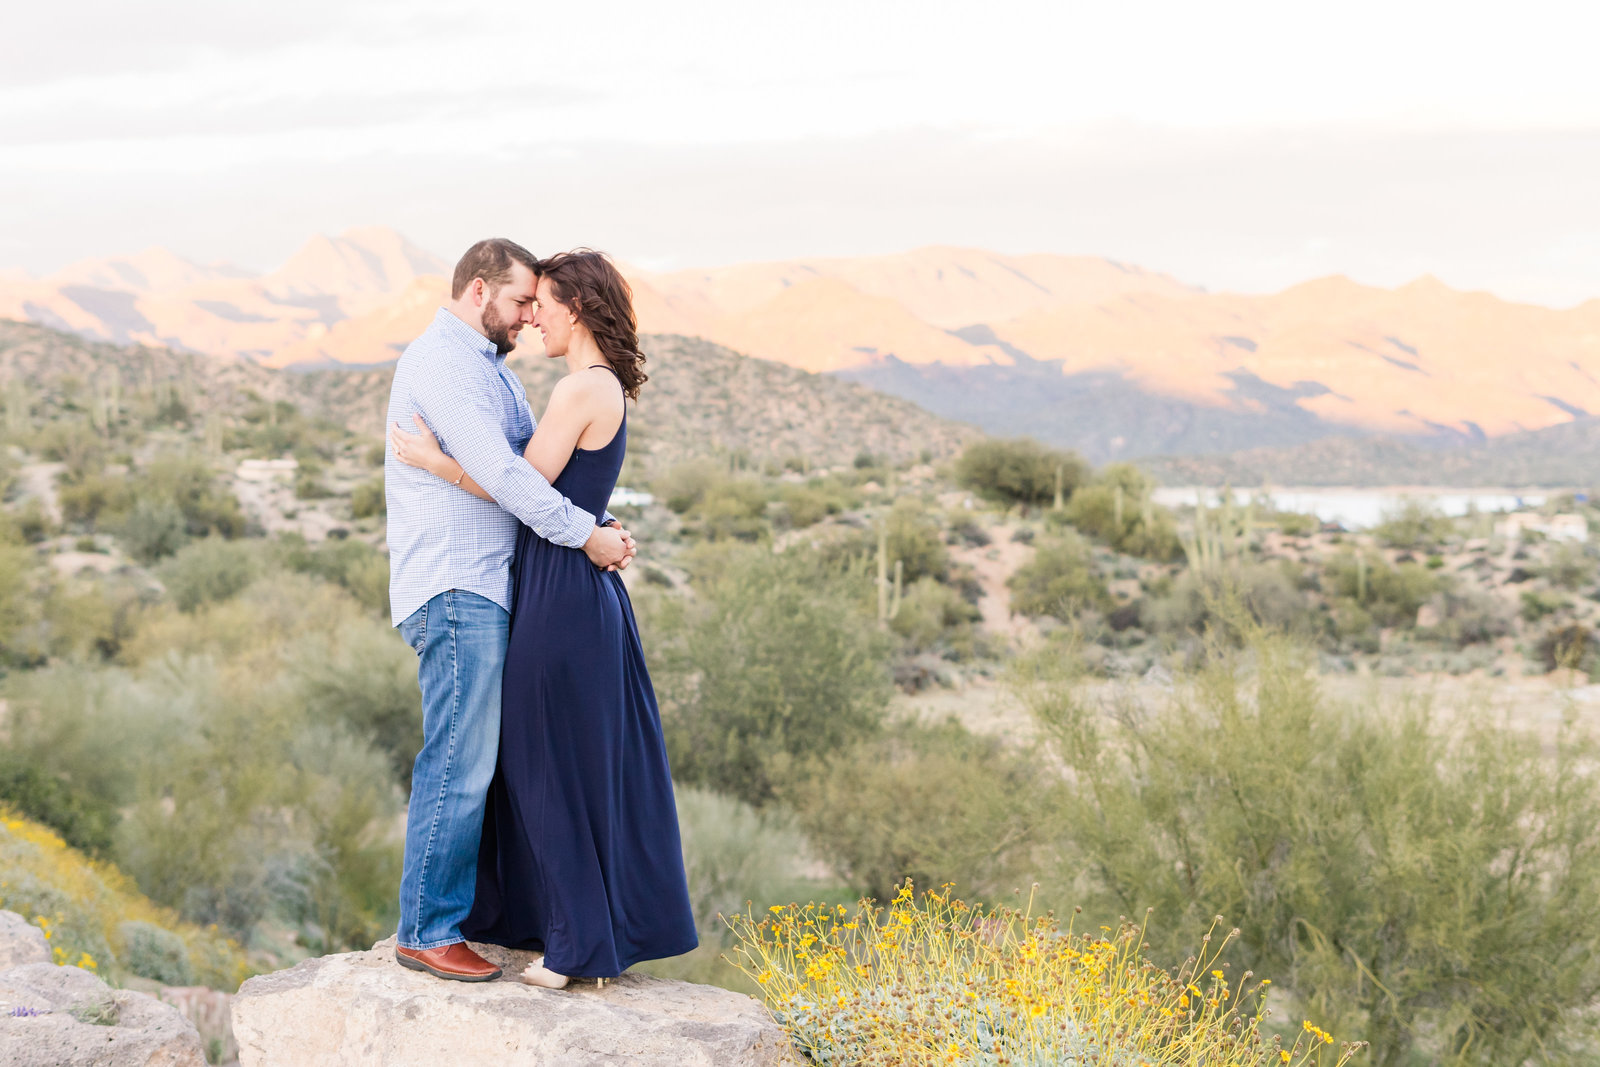 Couple cuddling on top of rock in front of mountains in desert